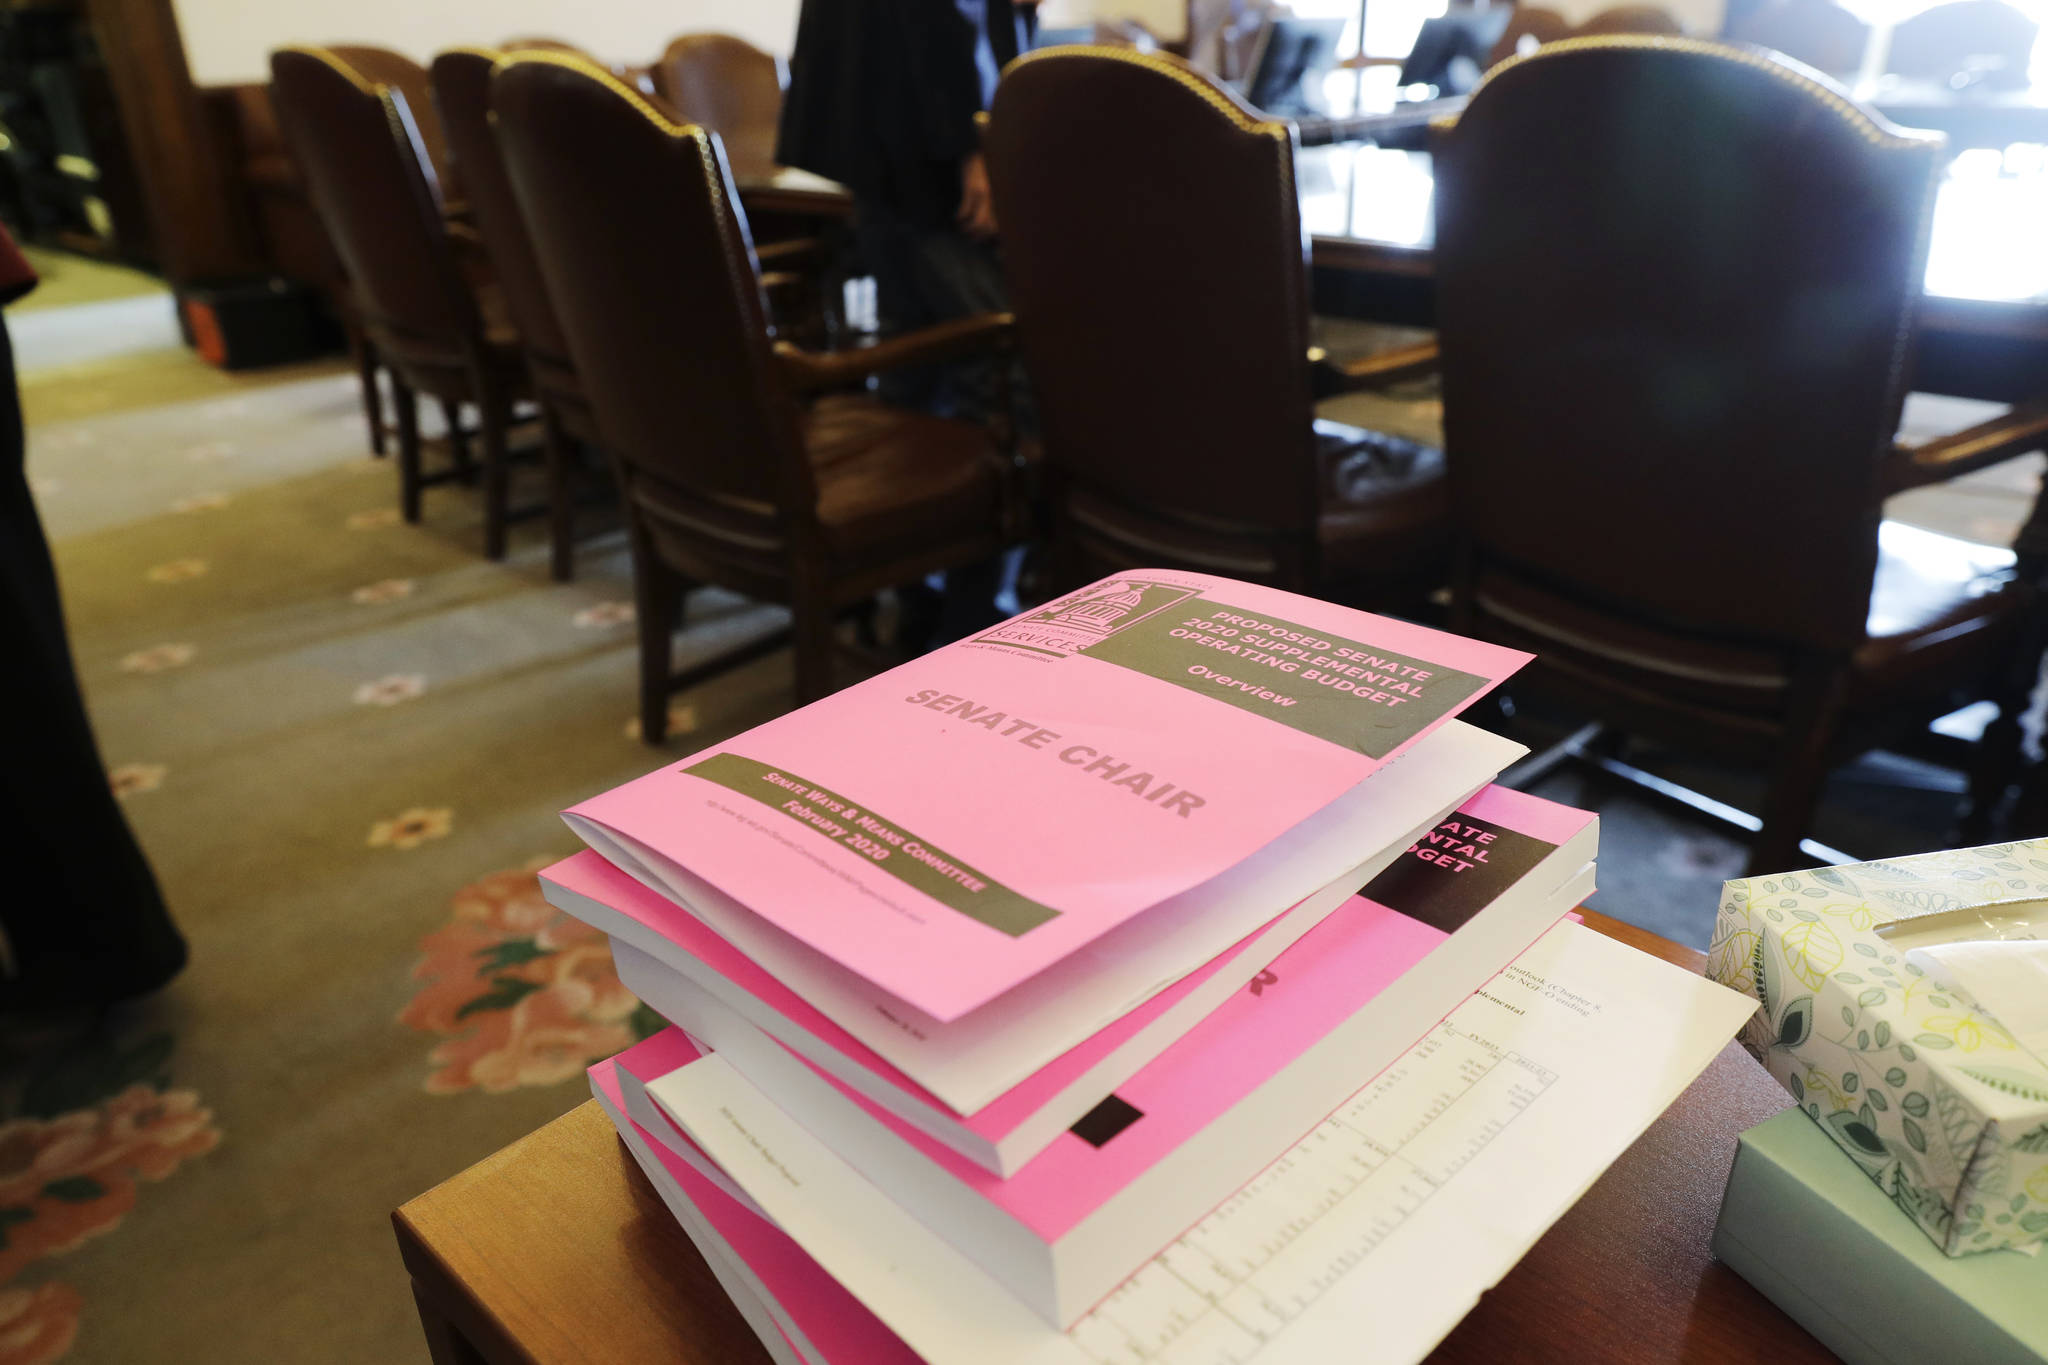 Copies of the Senate Democrats’ supplemental budget are stacked on a table Monday before a news conference at the Capitol in Olympia. (Ted S. Warren/The Associated Press)